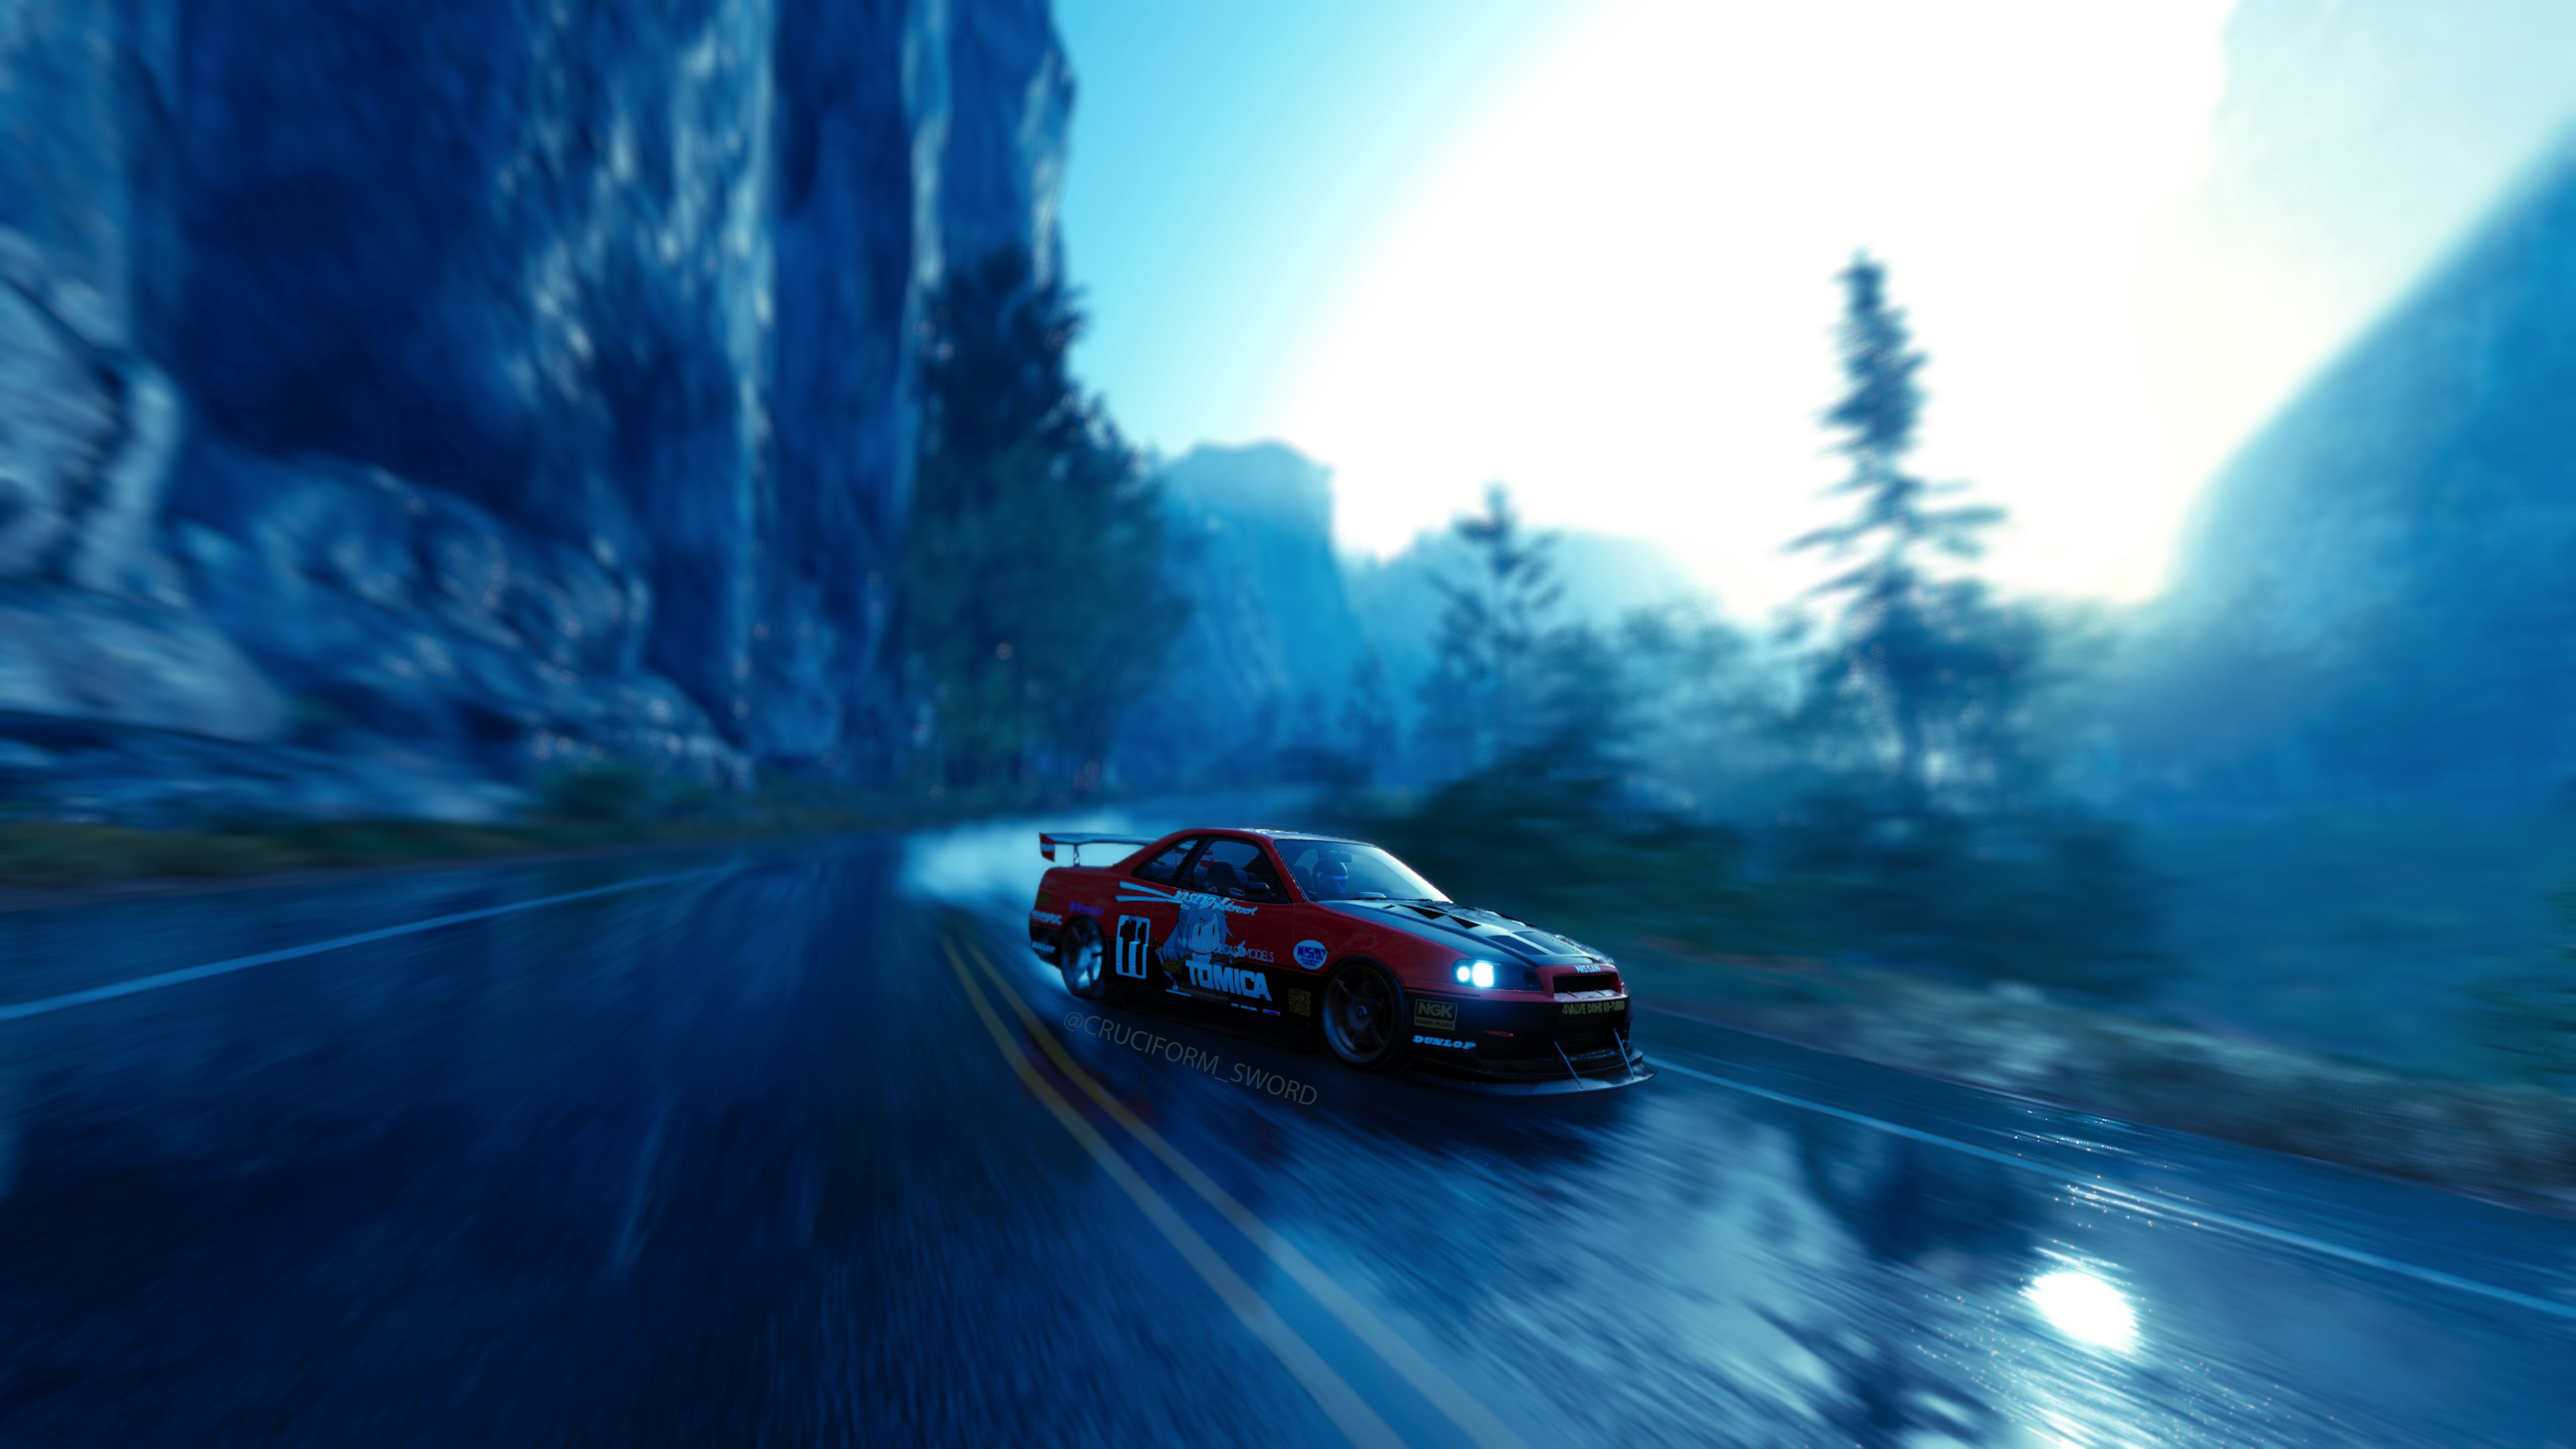 Skyline Gtr Drift The Crew 2 In Game Screen Shot Video Games Game Poster Vehicle 3840x2160